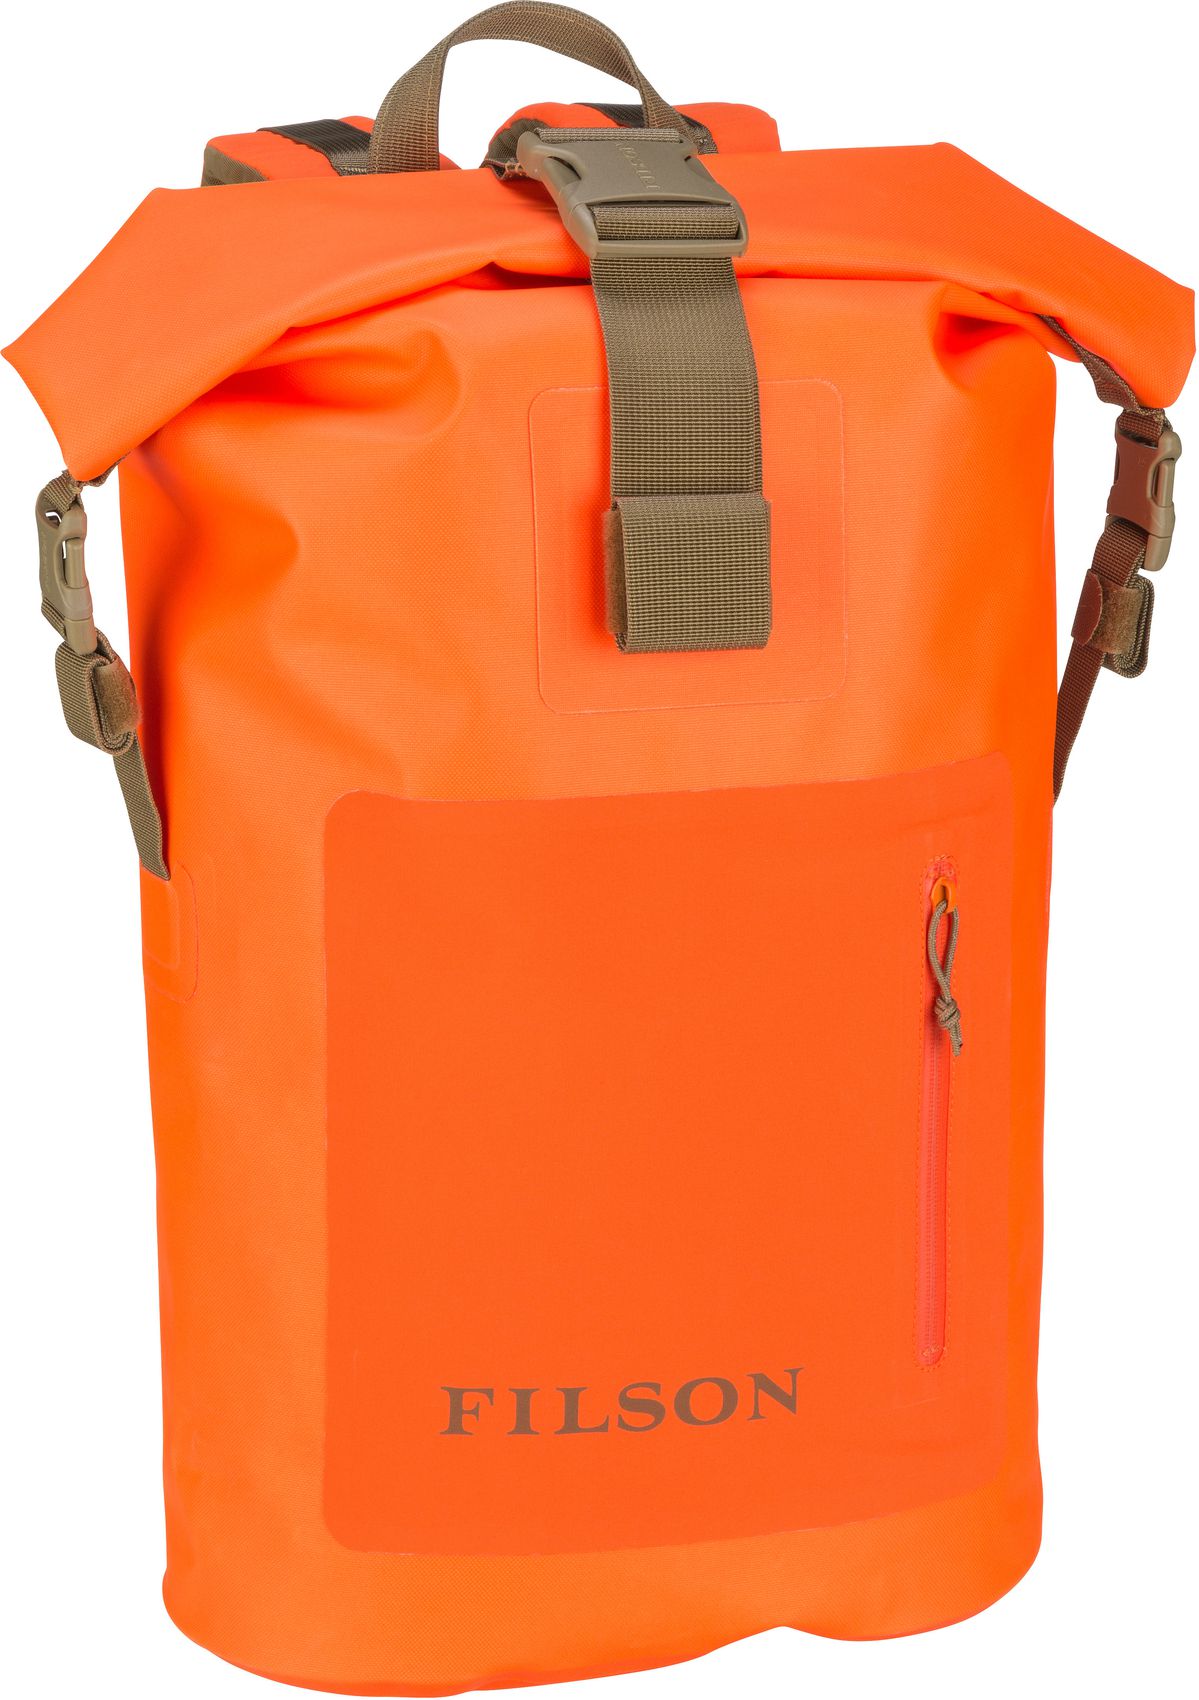 Filson Dry Backpack - Flame